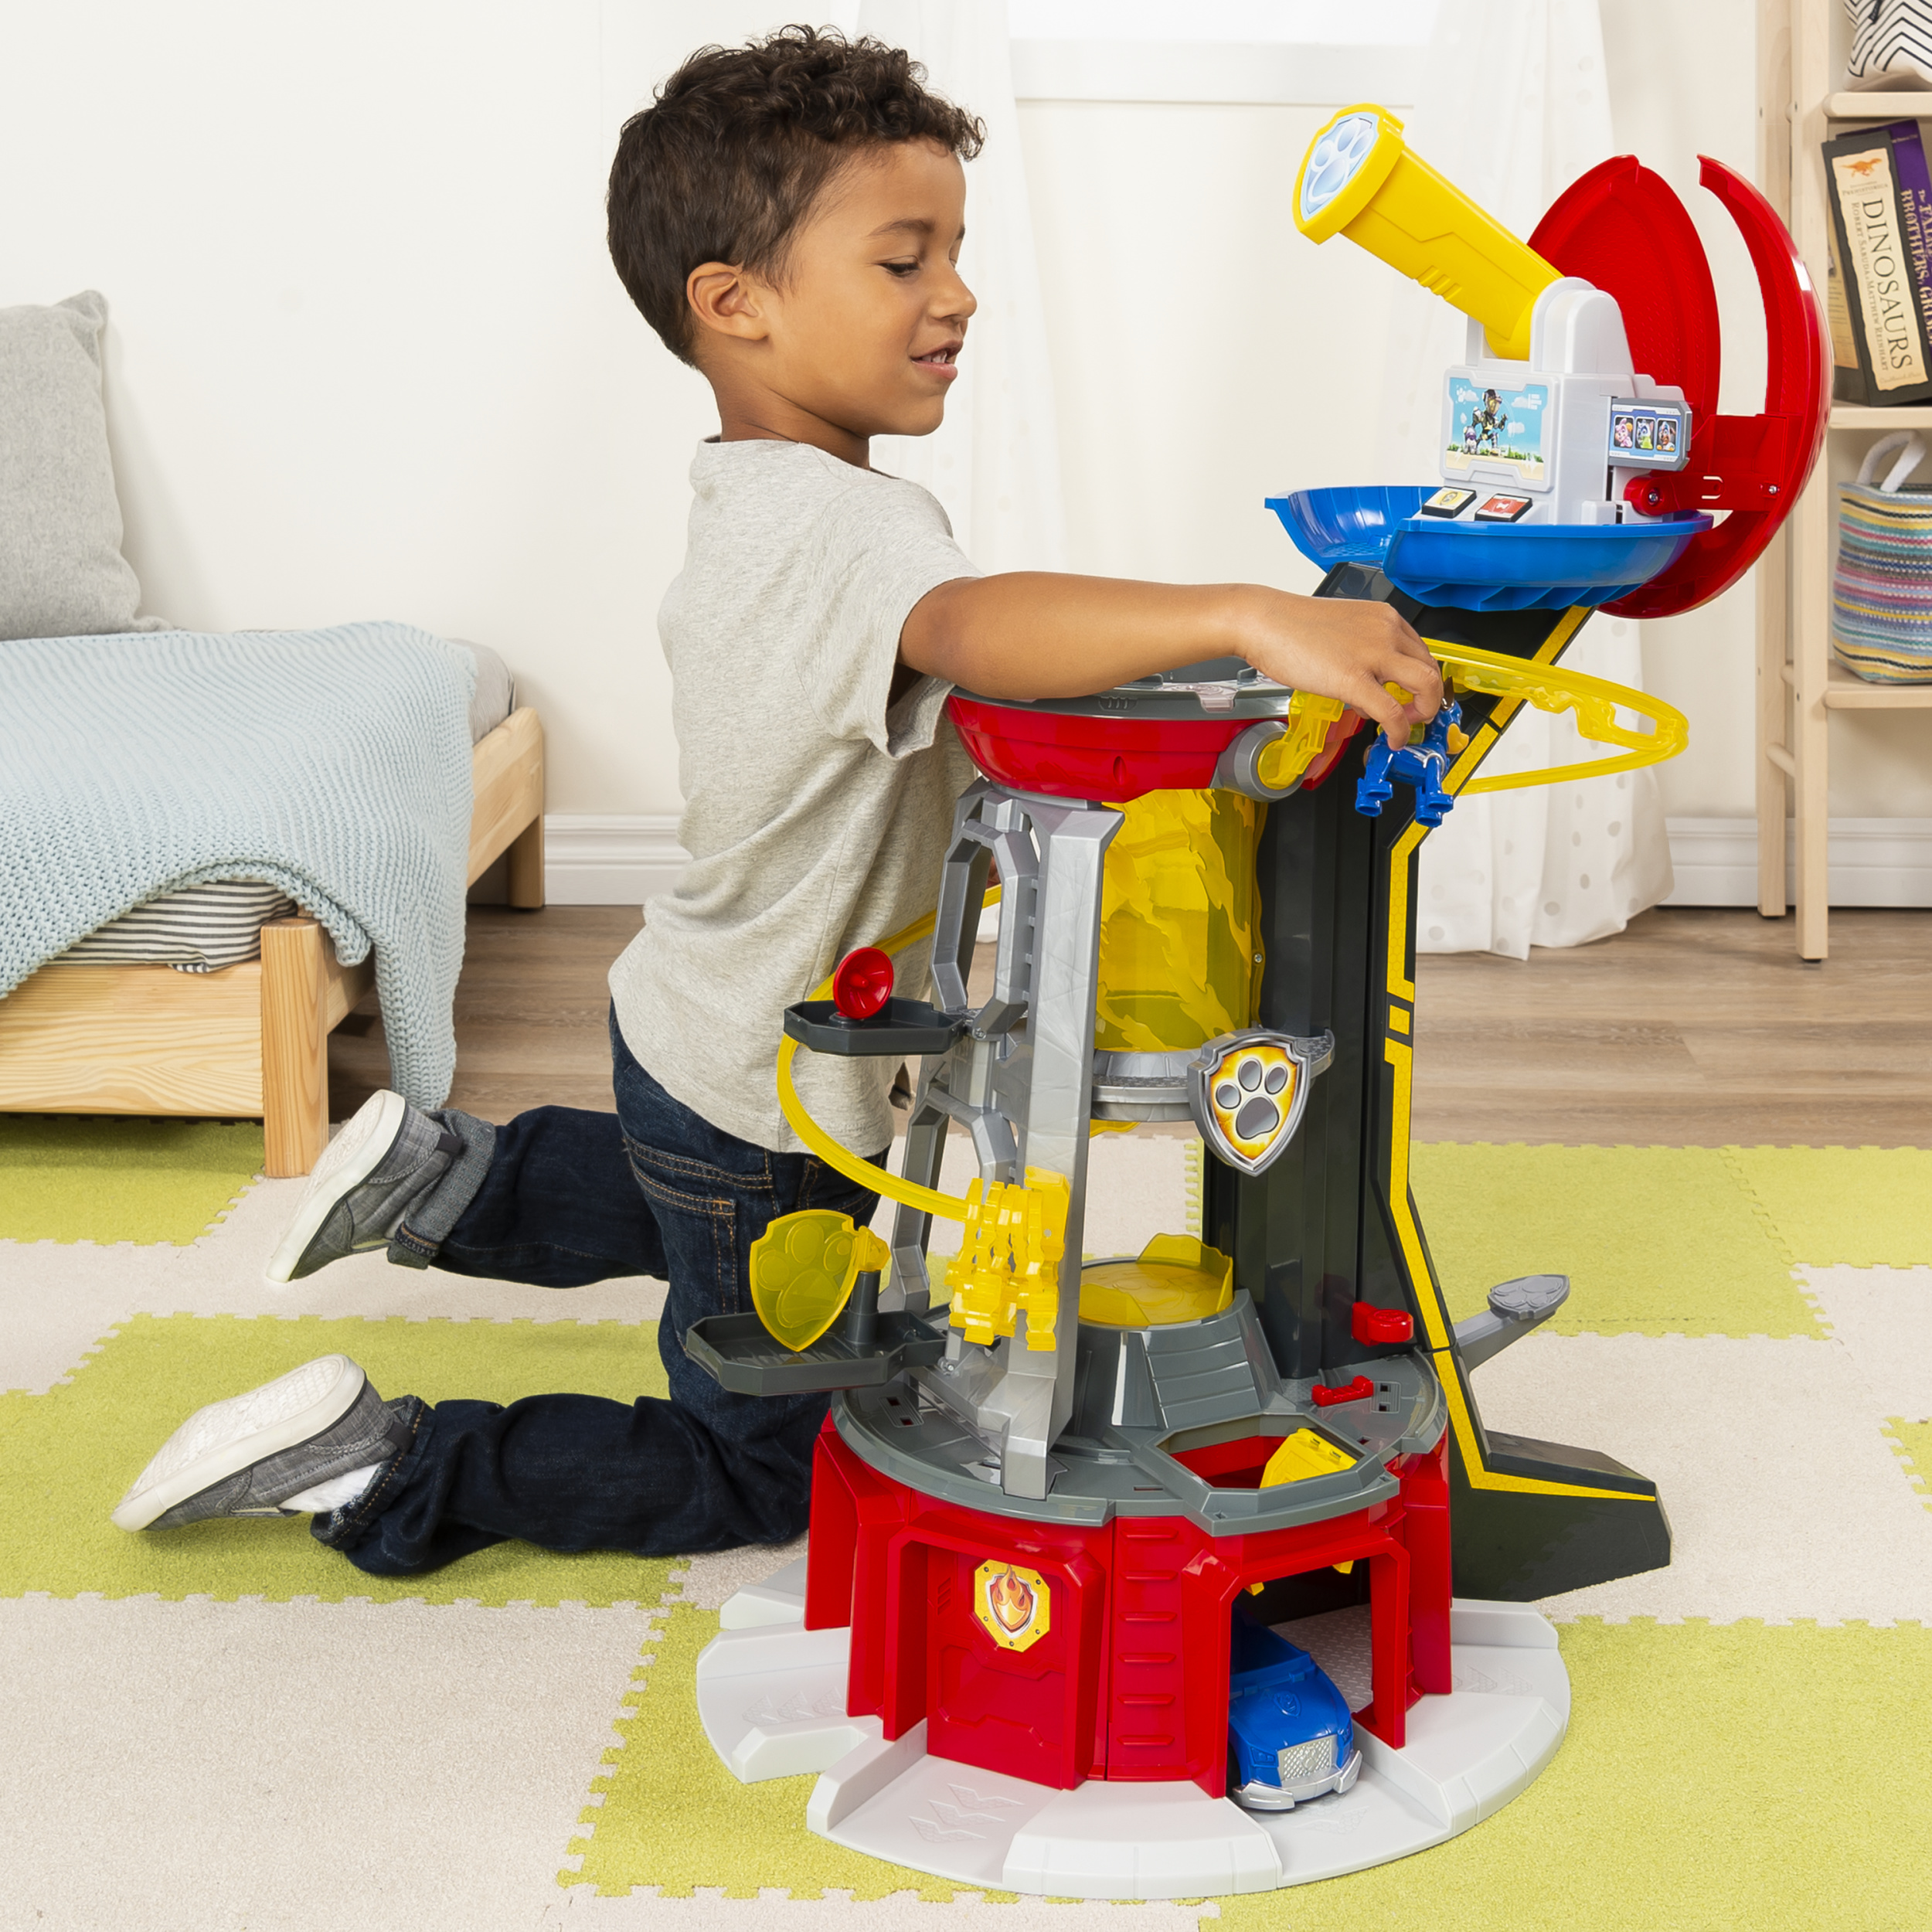 PAW Patrol Lookout Tower Plays...